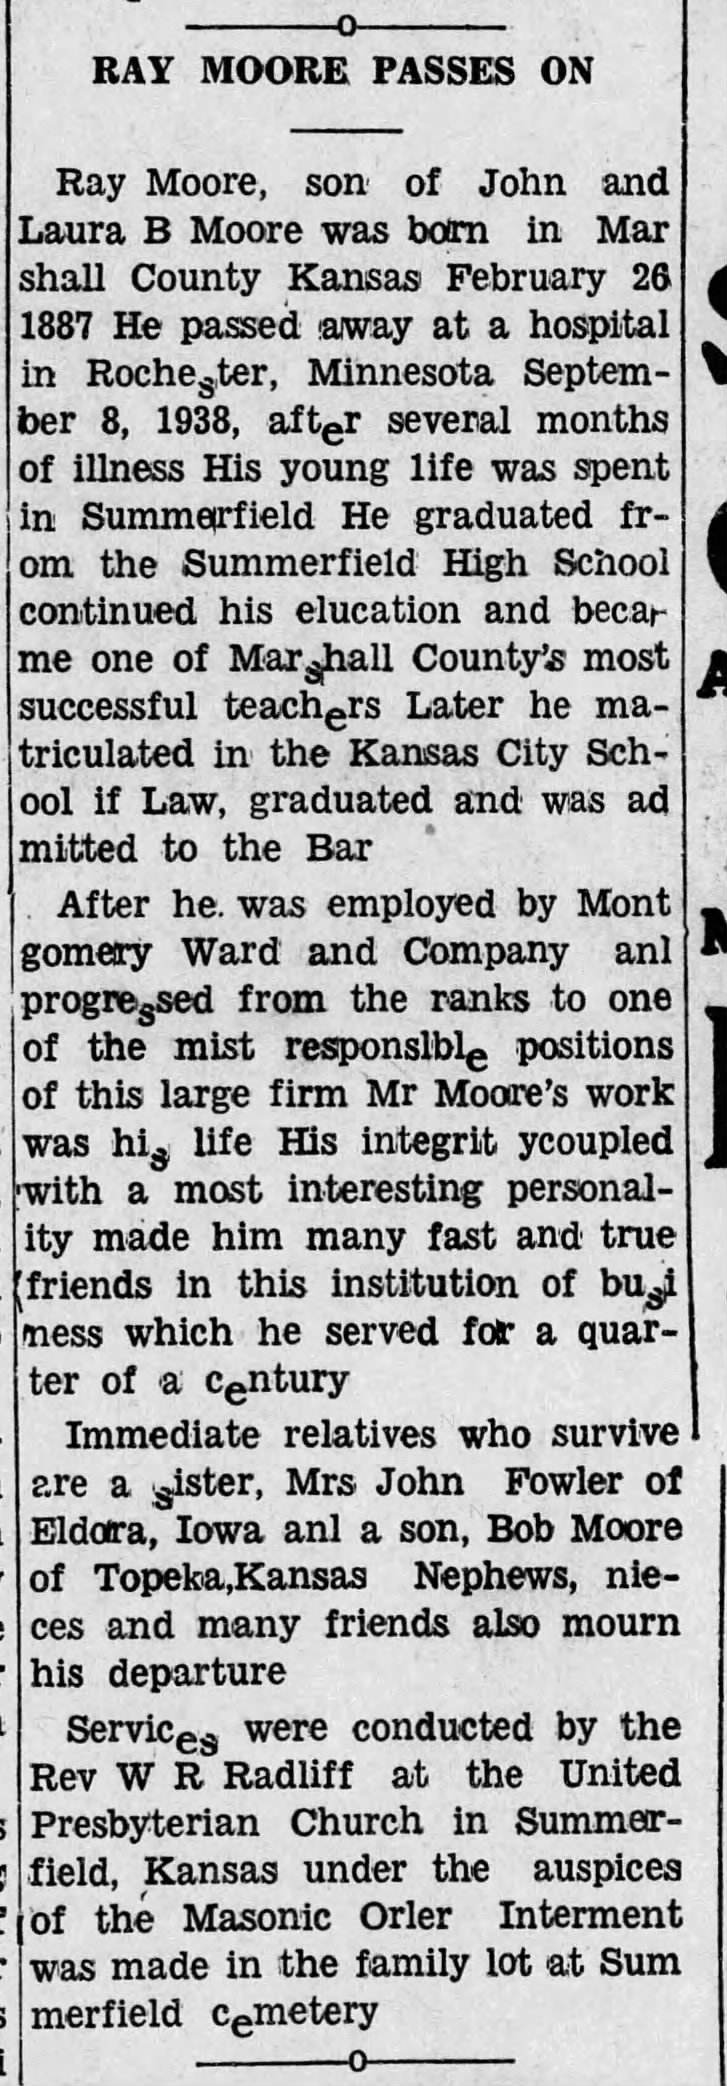 Moore, Ray; obit; The Summerfield Sun; Sept. 15, 1938; Thu pg 4